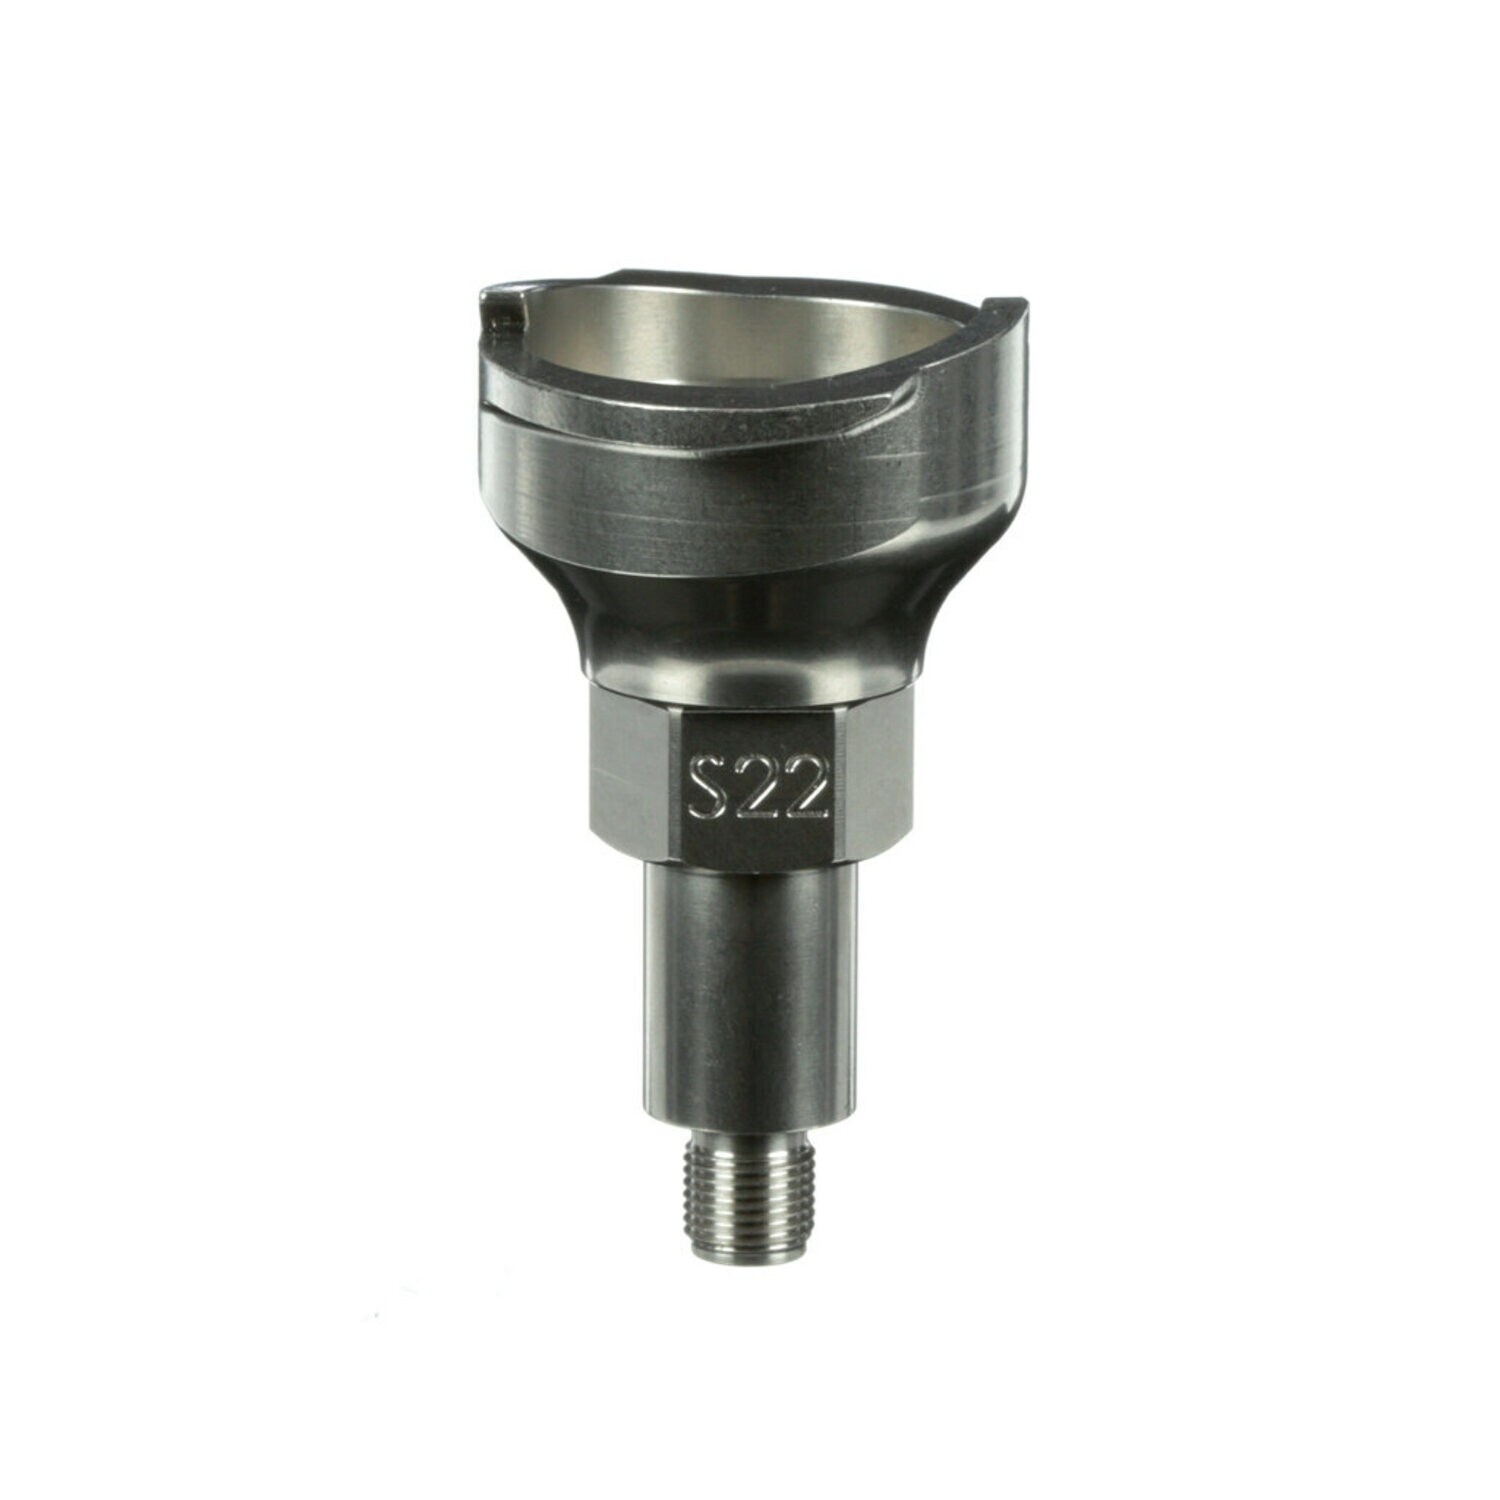 7100135958 - 3M PPS Series 2.0 Adapter, 26106, Type S22, 8 mm Male, 0.75 mm Thread,
4 per case